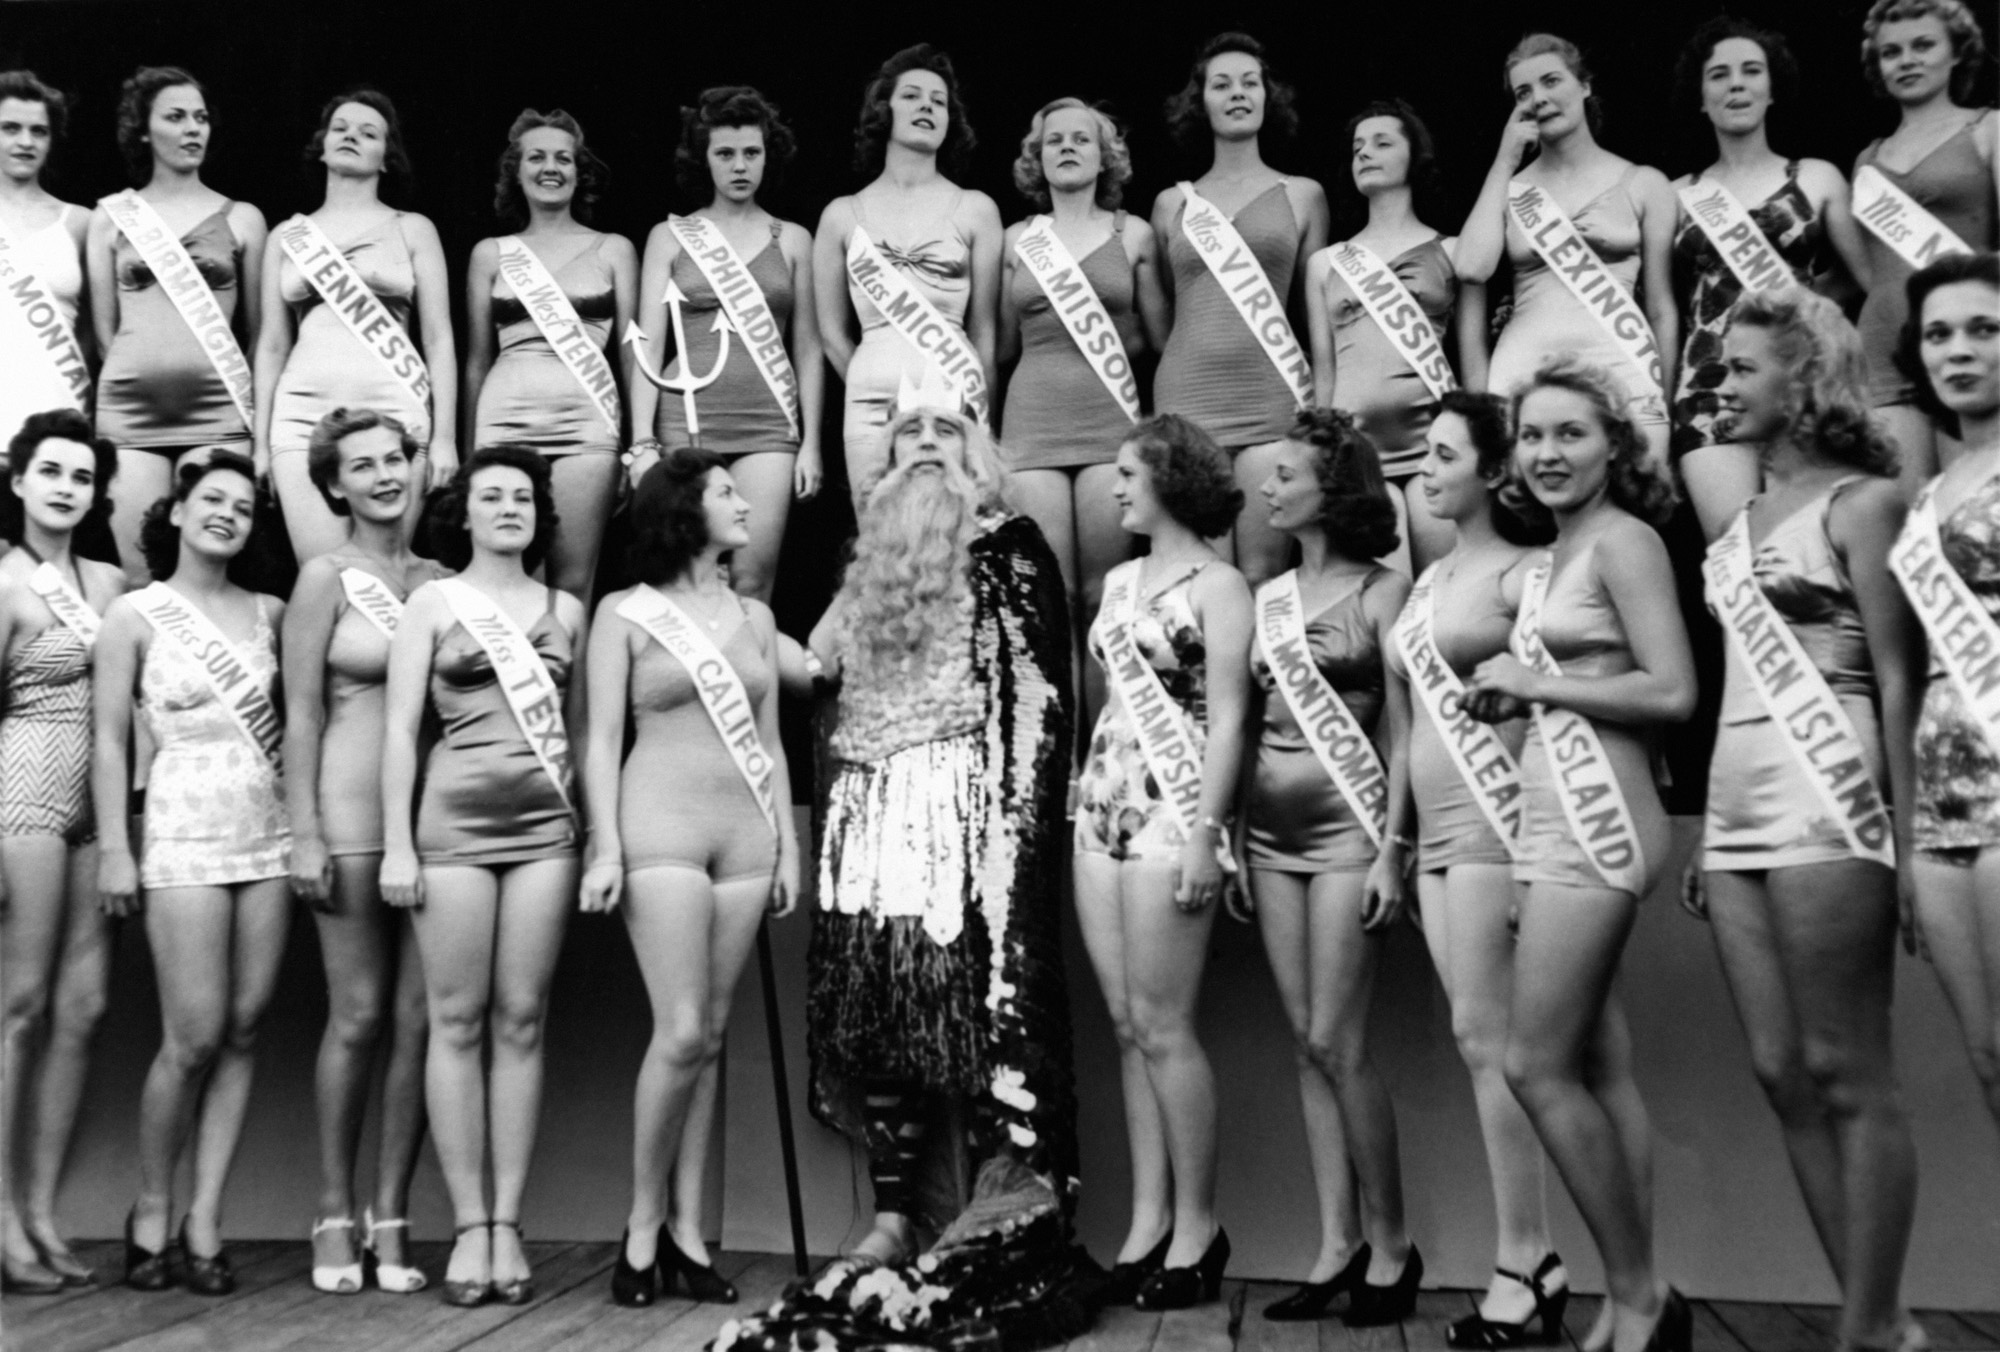 In Miss America, bikinis have been both required and banned